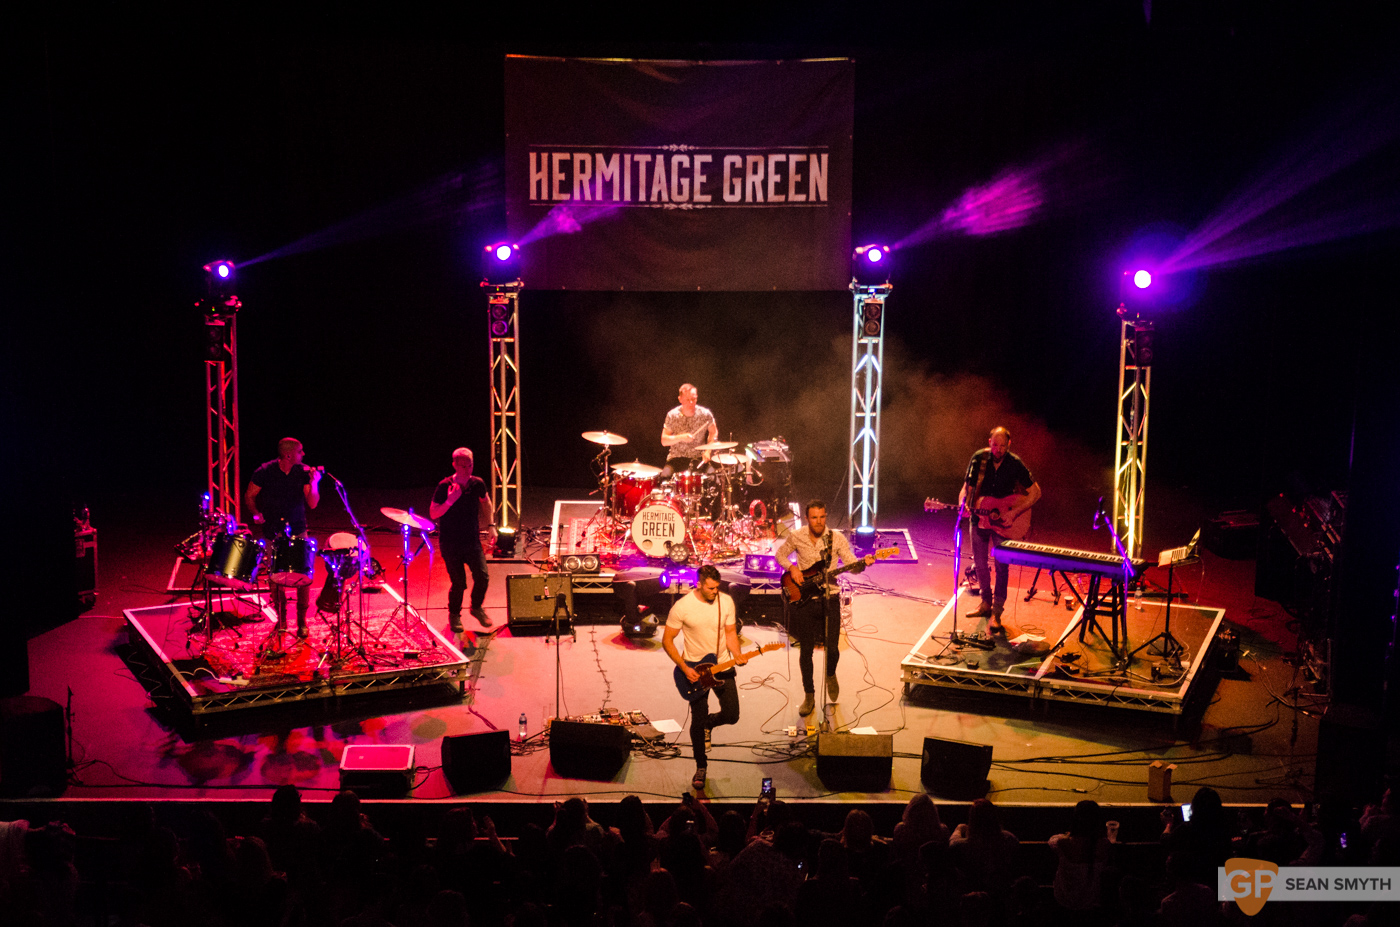 hermitage-green-at-cork-opera-house-by-sean-smyth-8-3-16-32-of-45